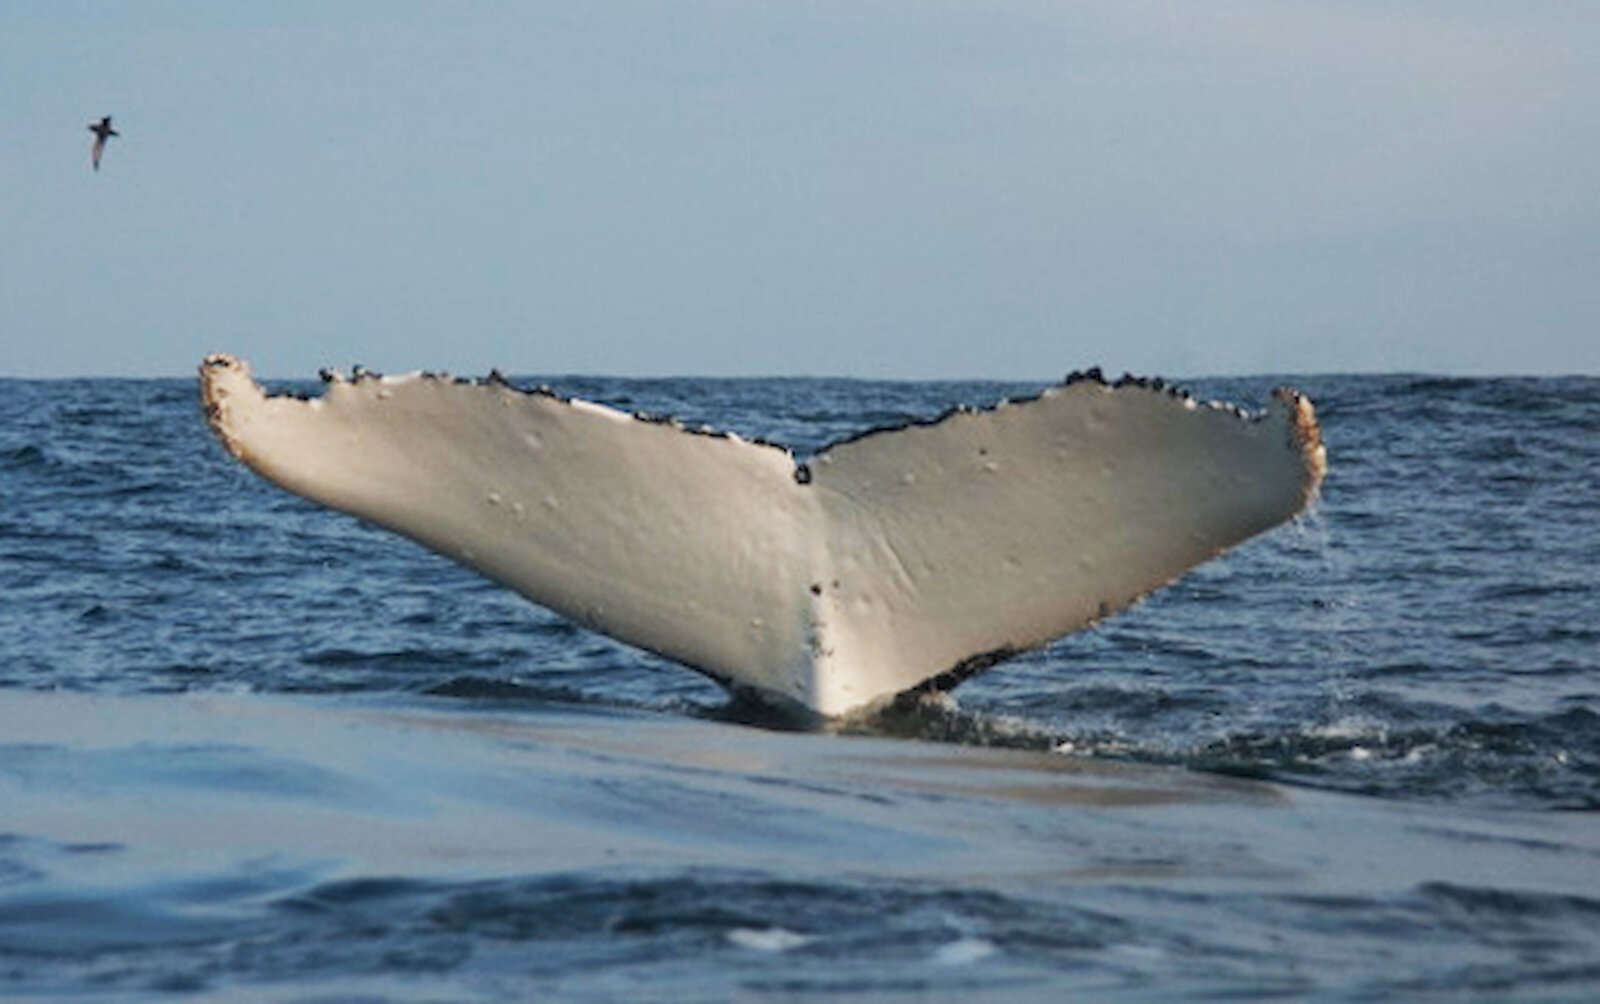 What Tale Does a Whale Tail Tell?